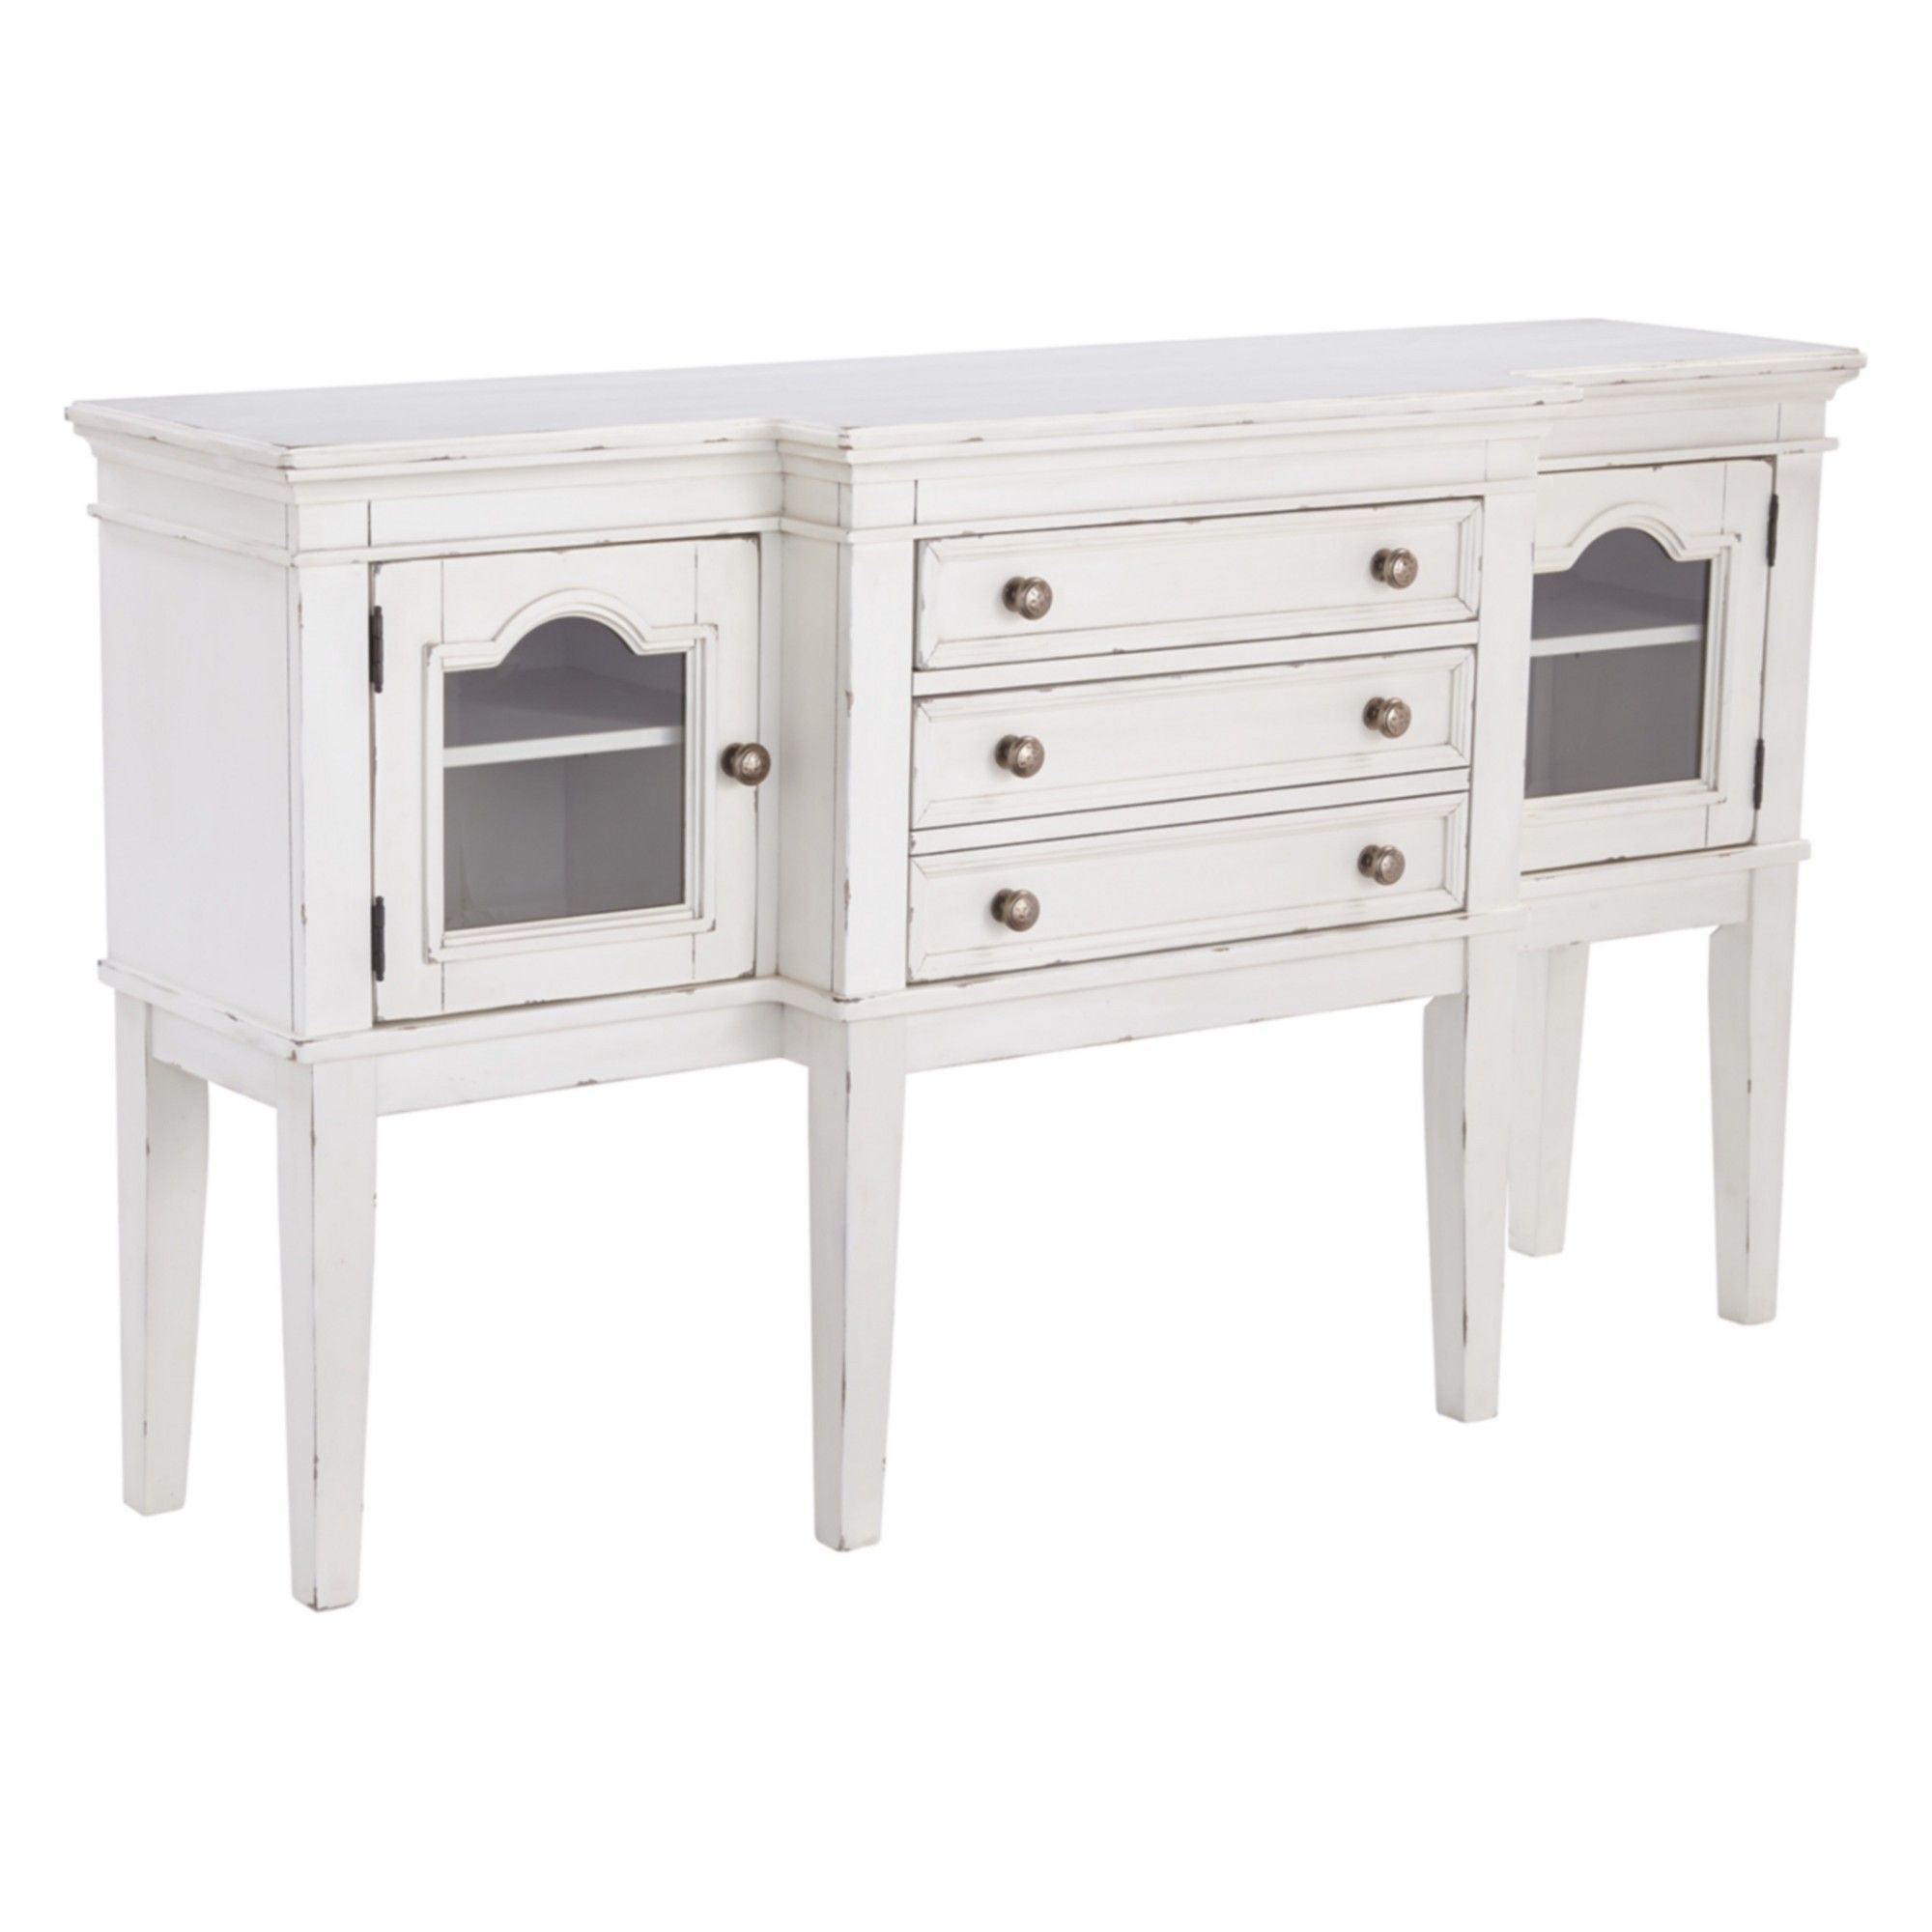 Danbeck Dining Room Server Chipped White – Signature Design Regarding Tiphaine Sideboards (View 25 of 30)